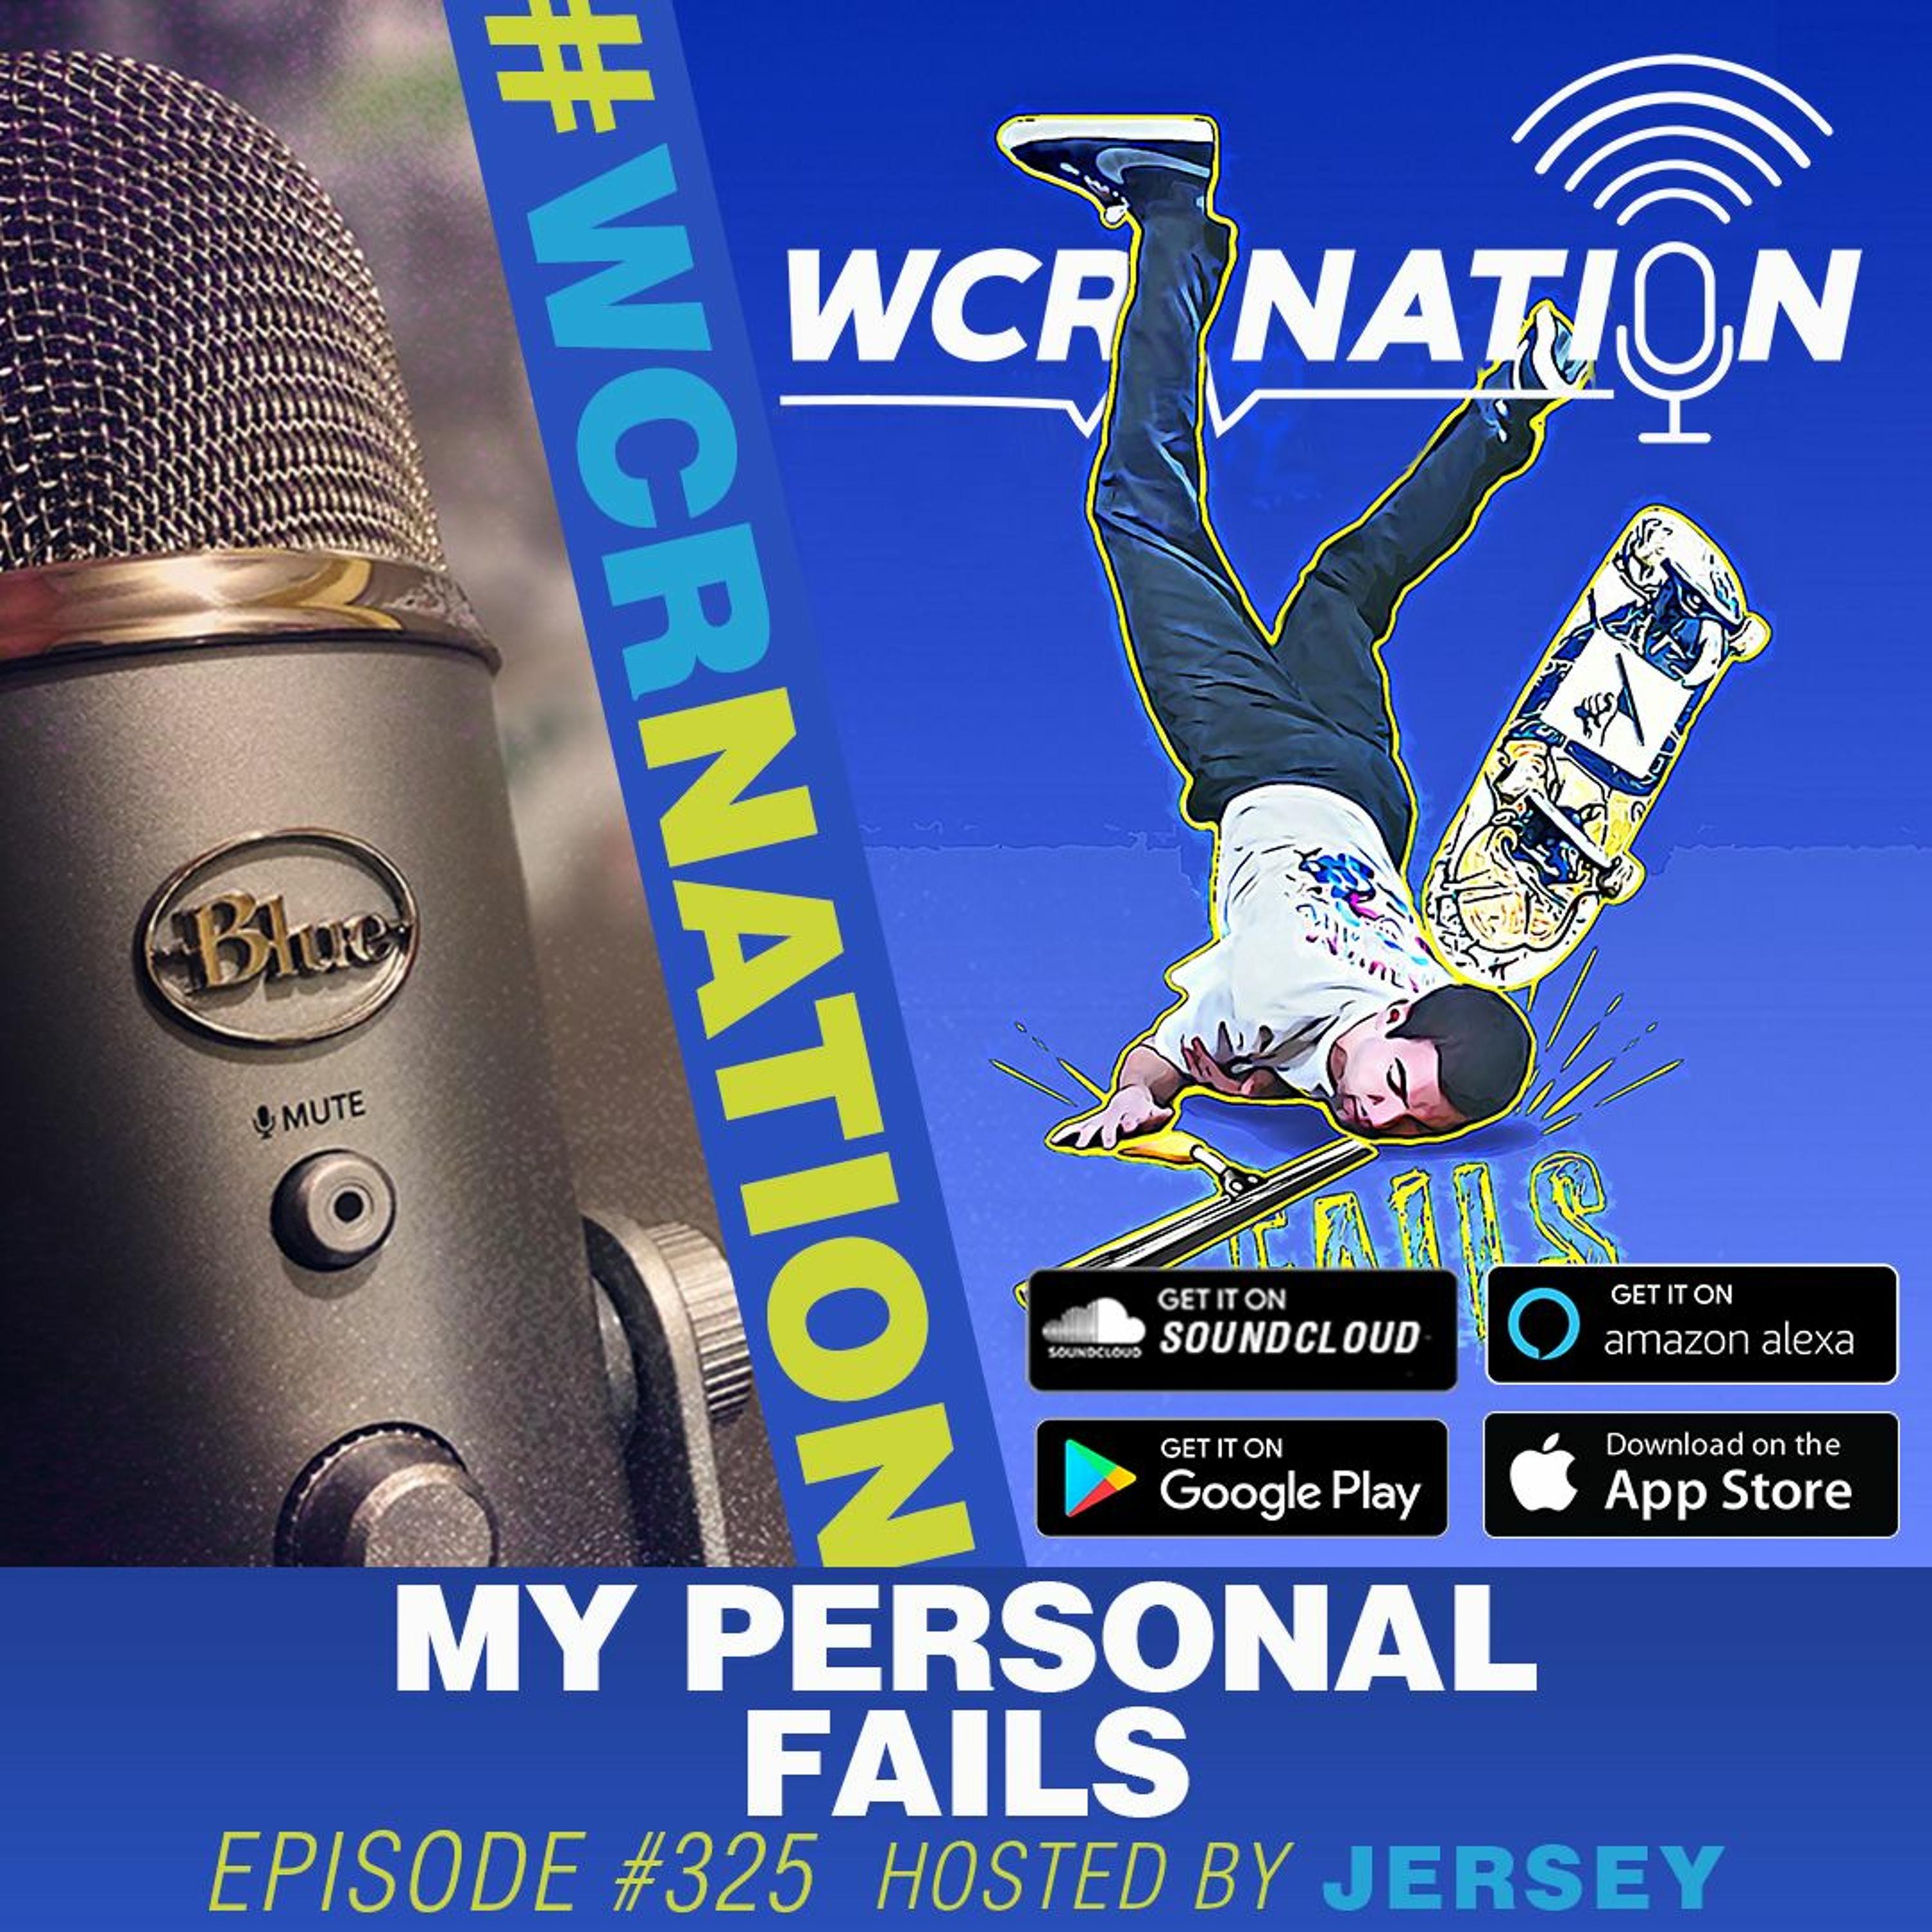 My Personal Fails | WCR NATION Ep. 325 | A Window Cleaner Podcast